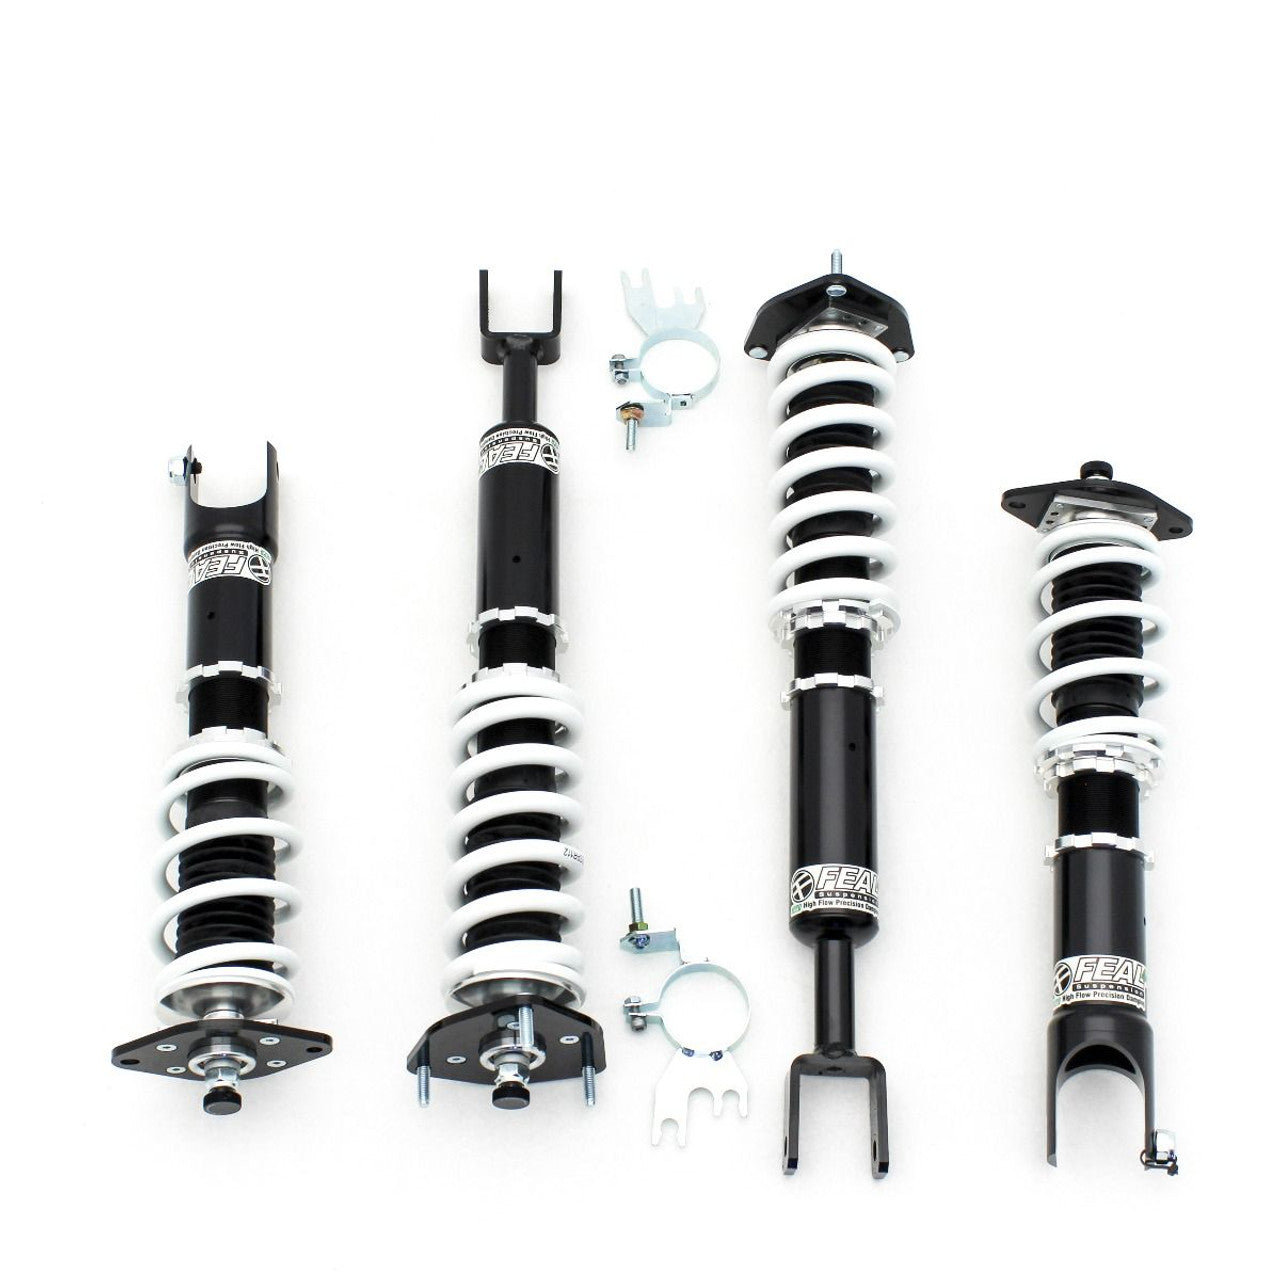 Feal Suspension 441 Coilovers - 2003 - 2007 Infiniti G35 / Nissan 350z